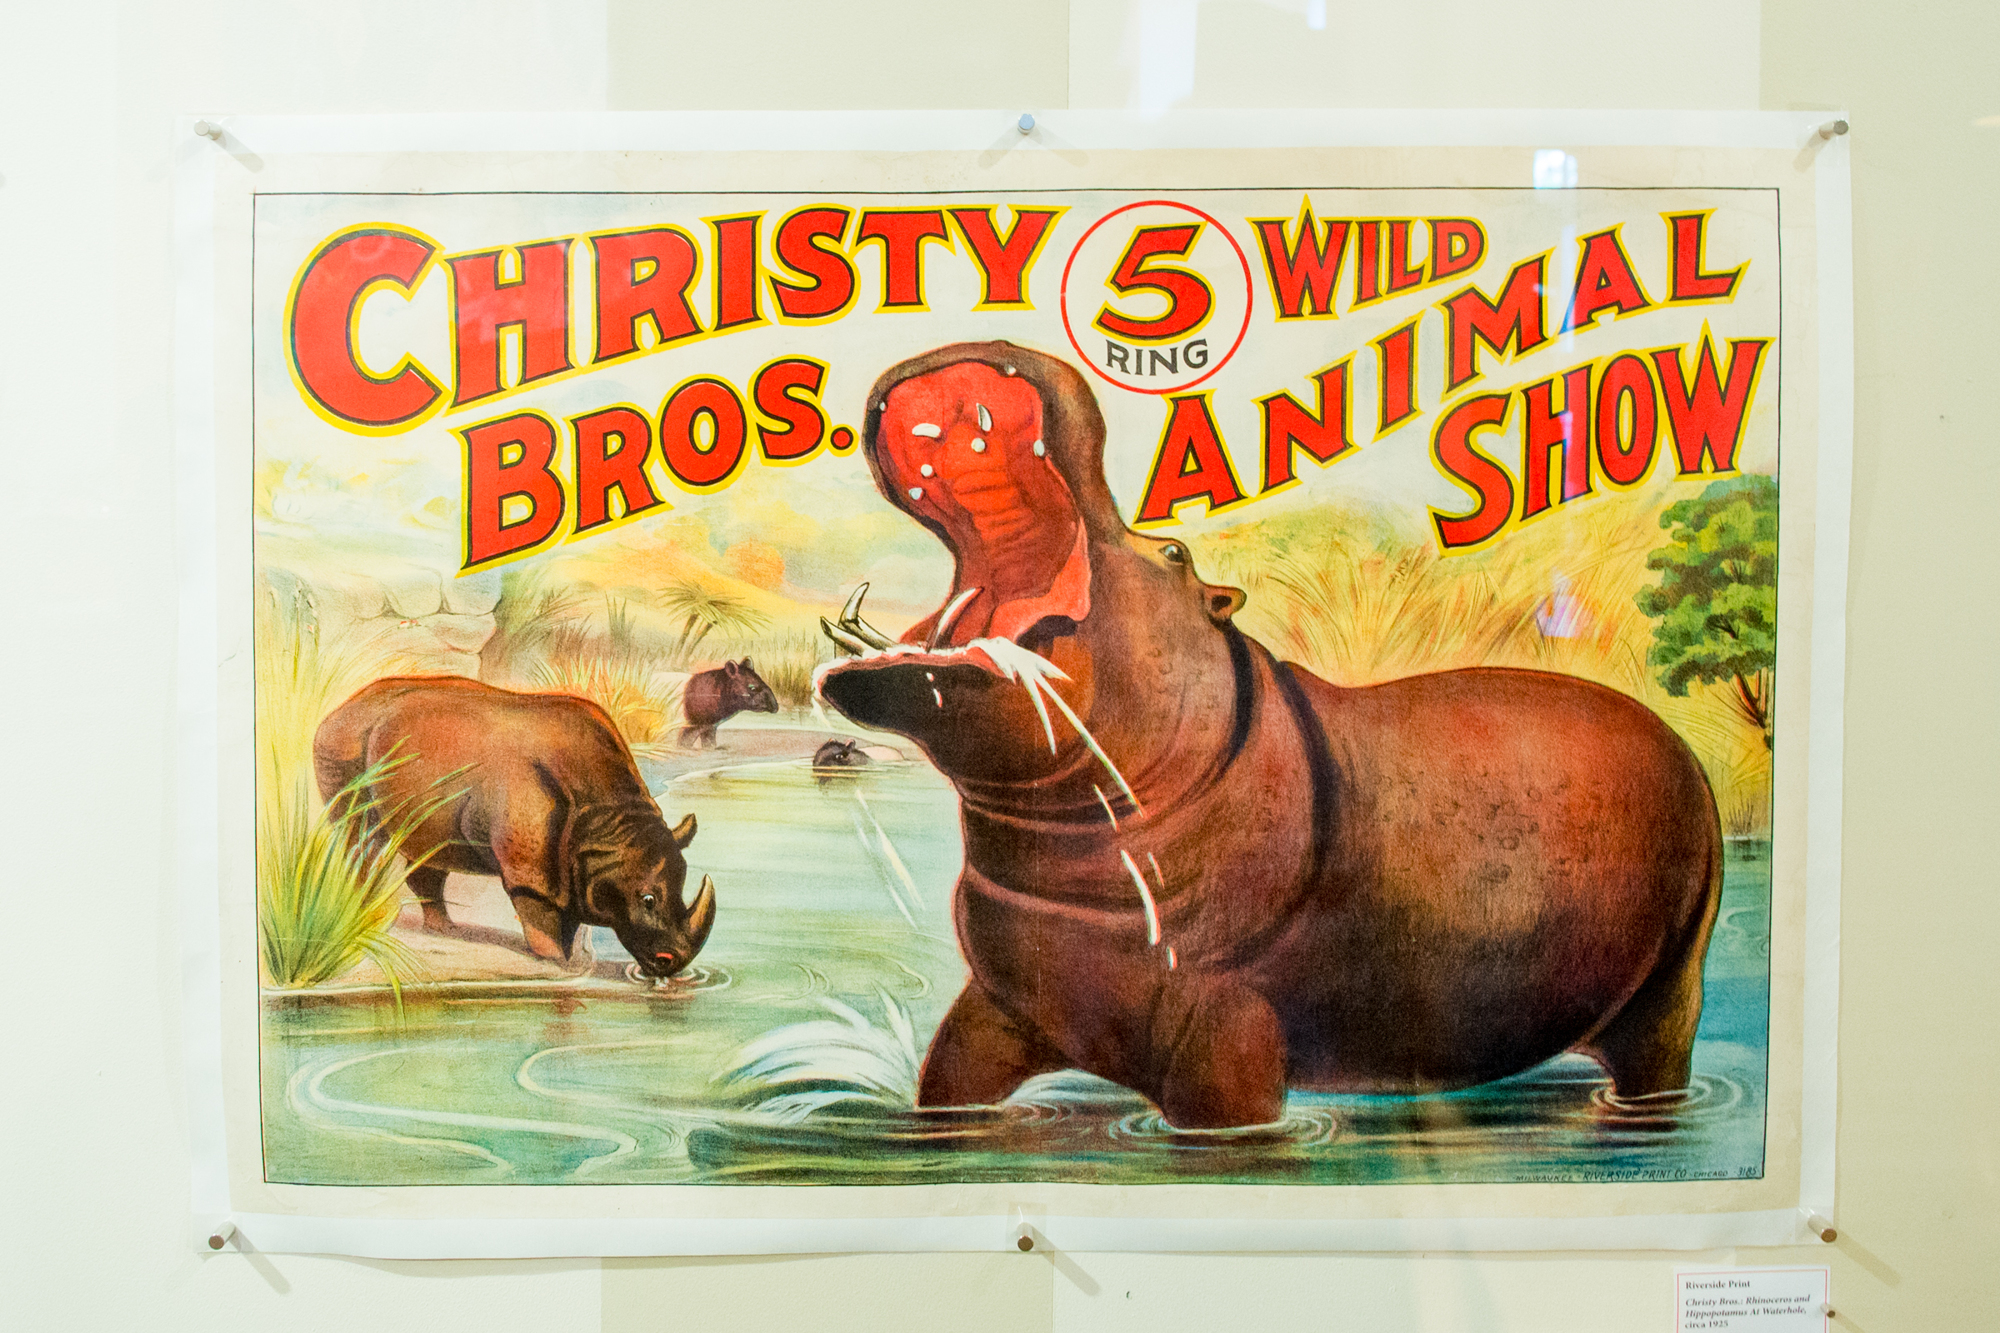 The wealth of circus artifacts sets the Ringling Museum apart from standard museums in the world.